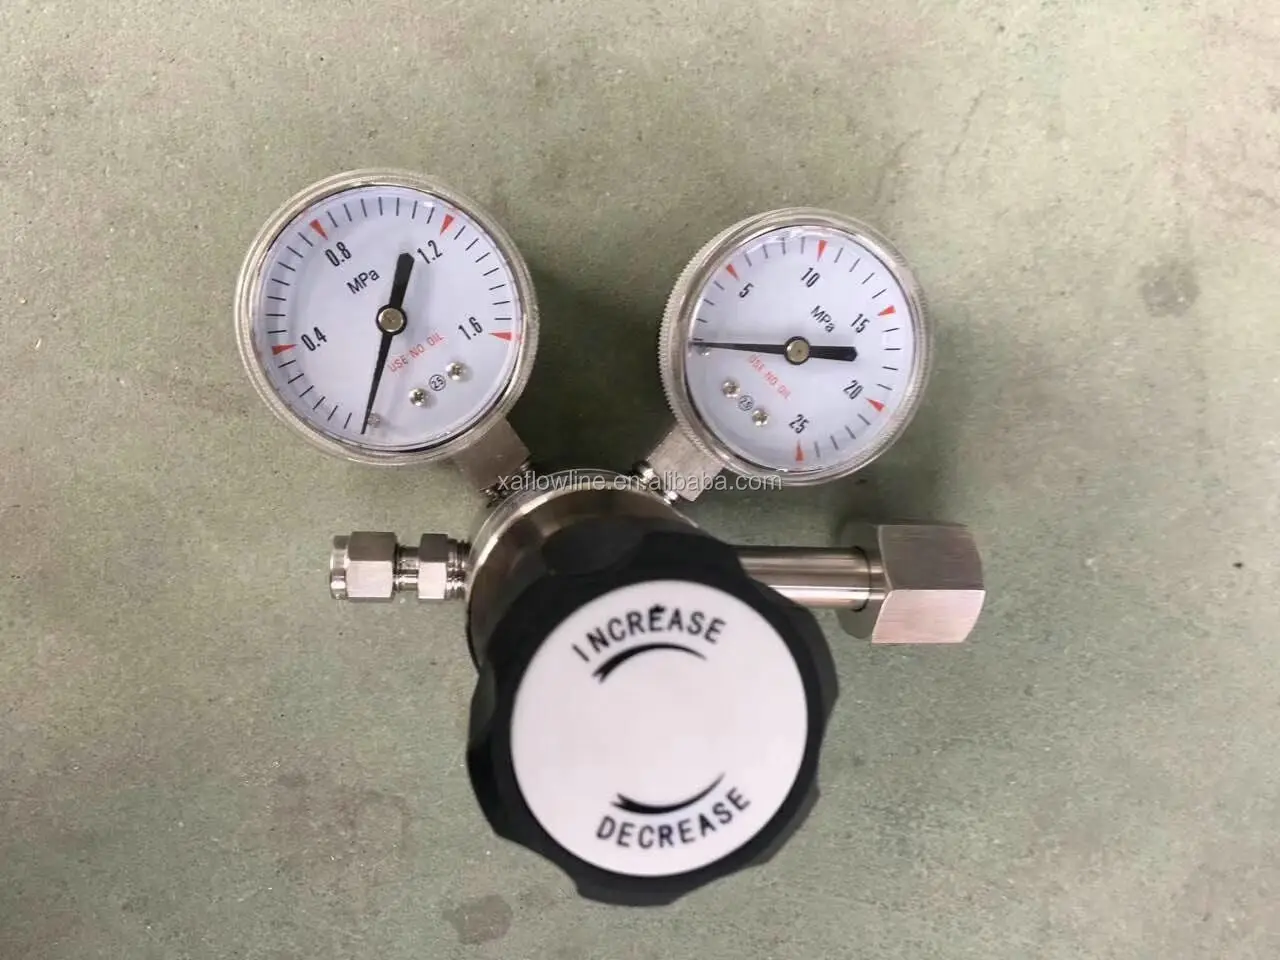 double gauges pressure regulator for he gas with 100m3/h flow